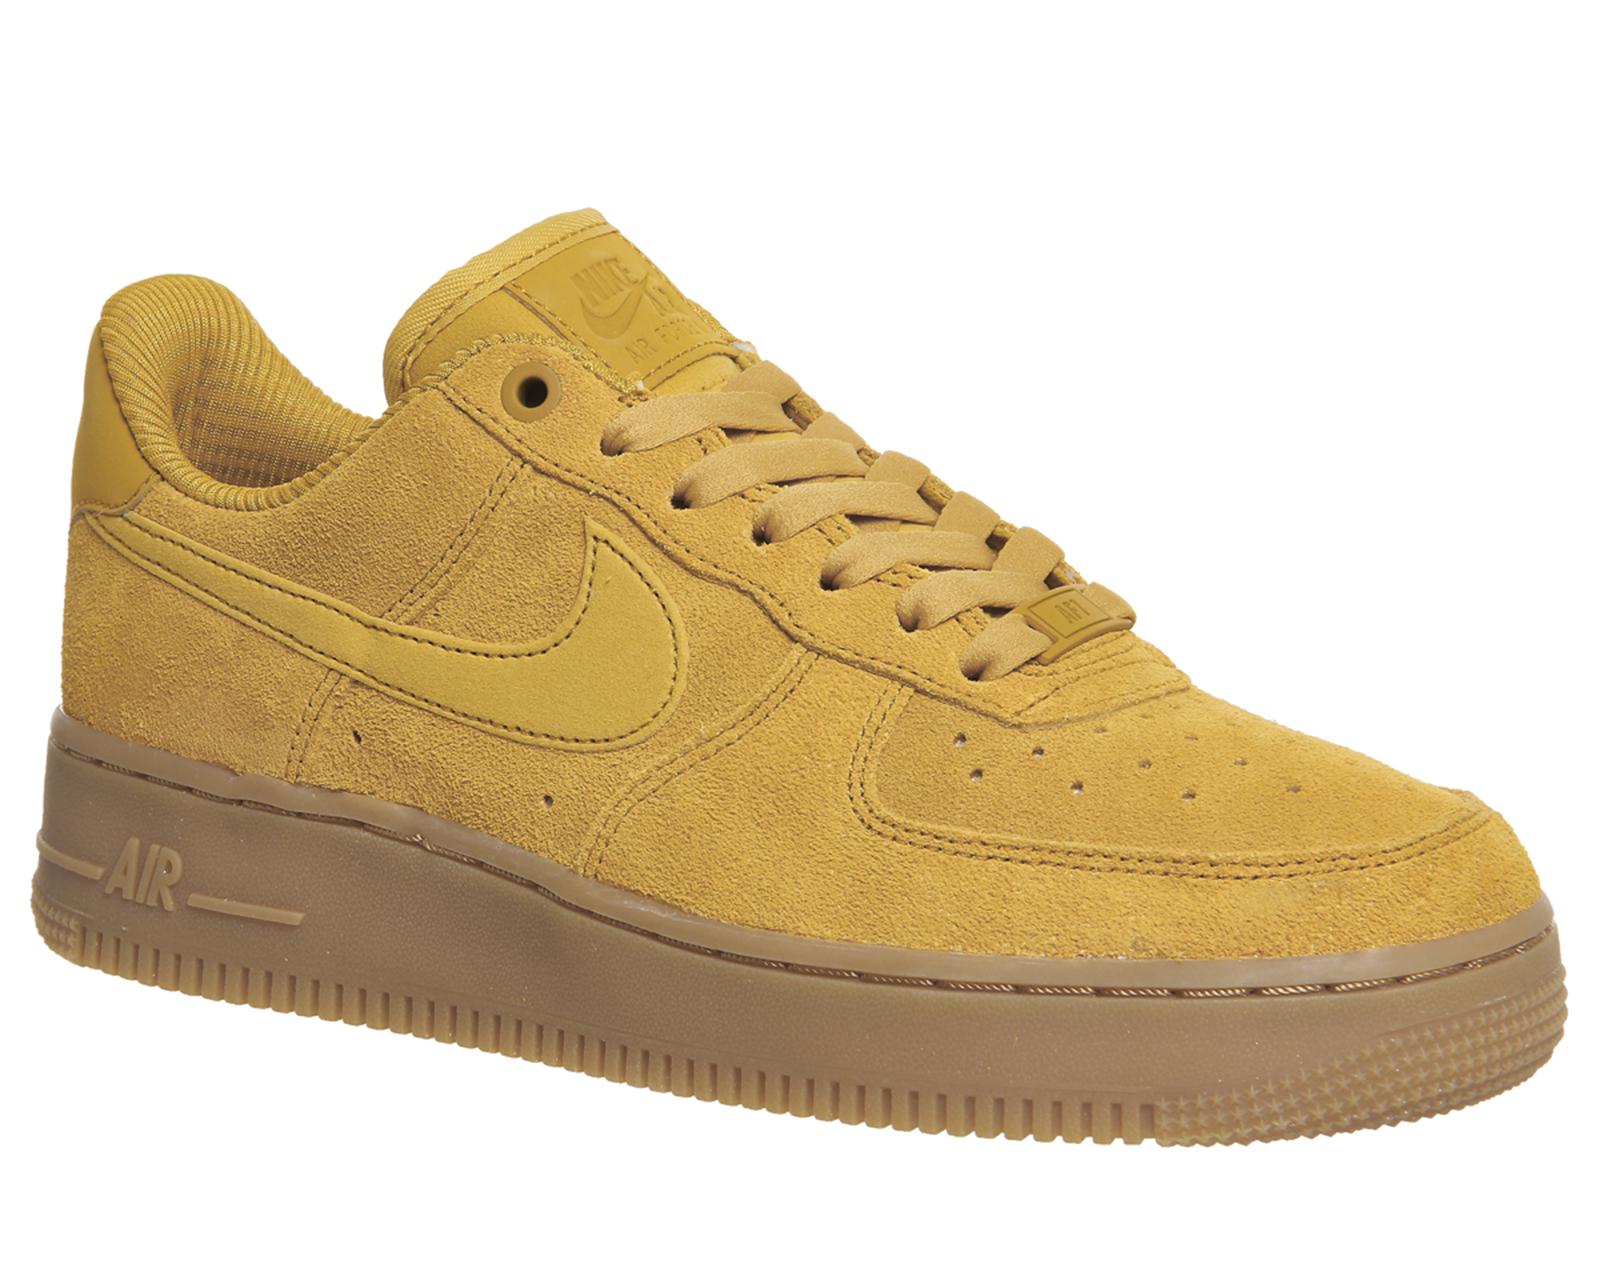 yellow suede air force 1